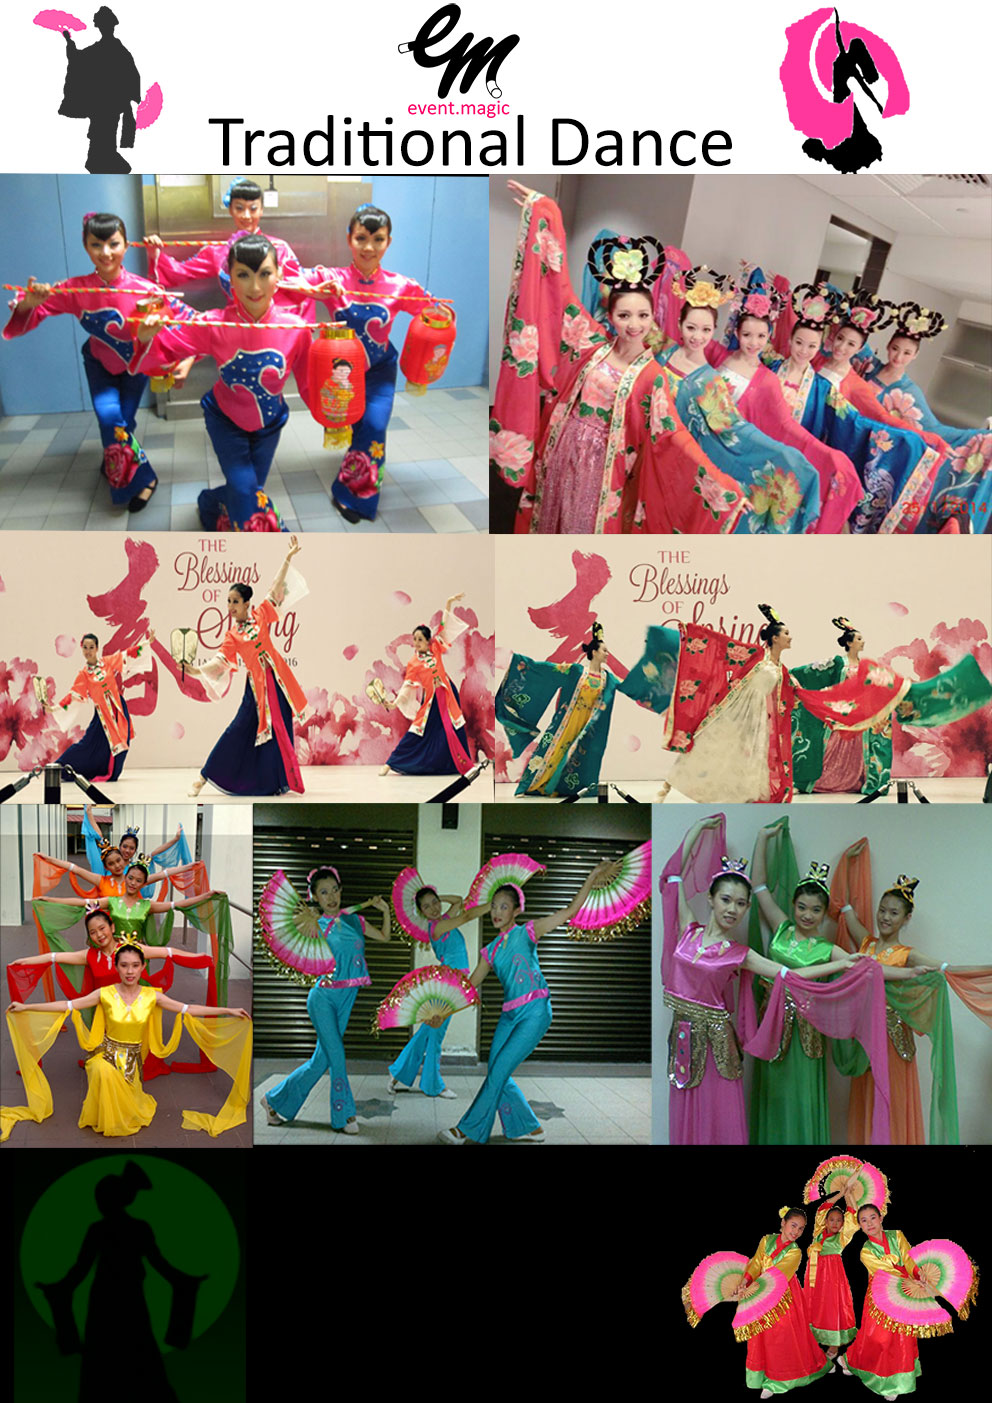 Dancers for hire Singapore, Chinese dancers, traditional dancers Singapore,